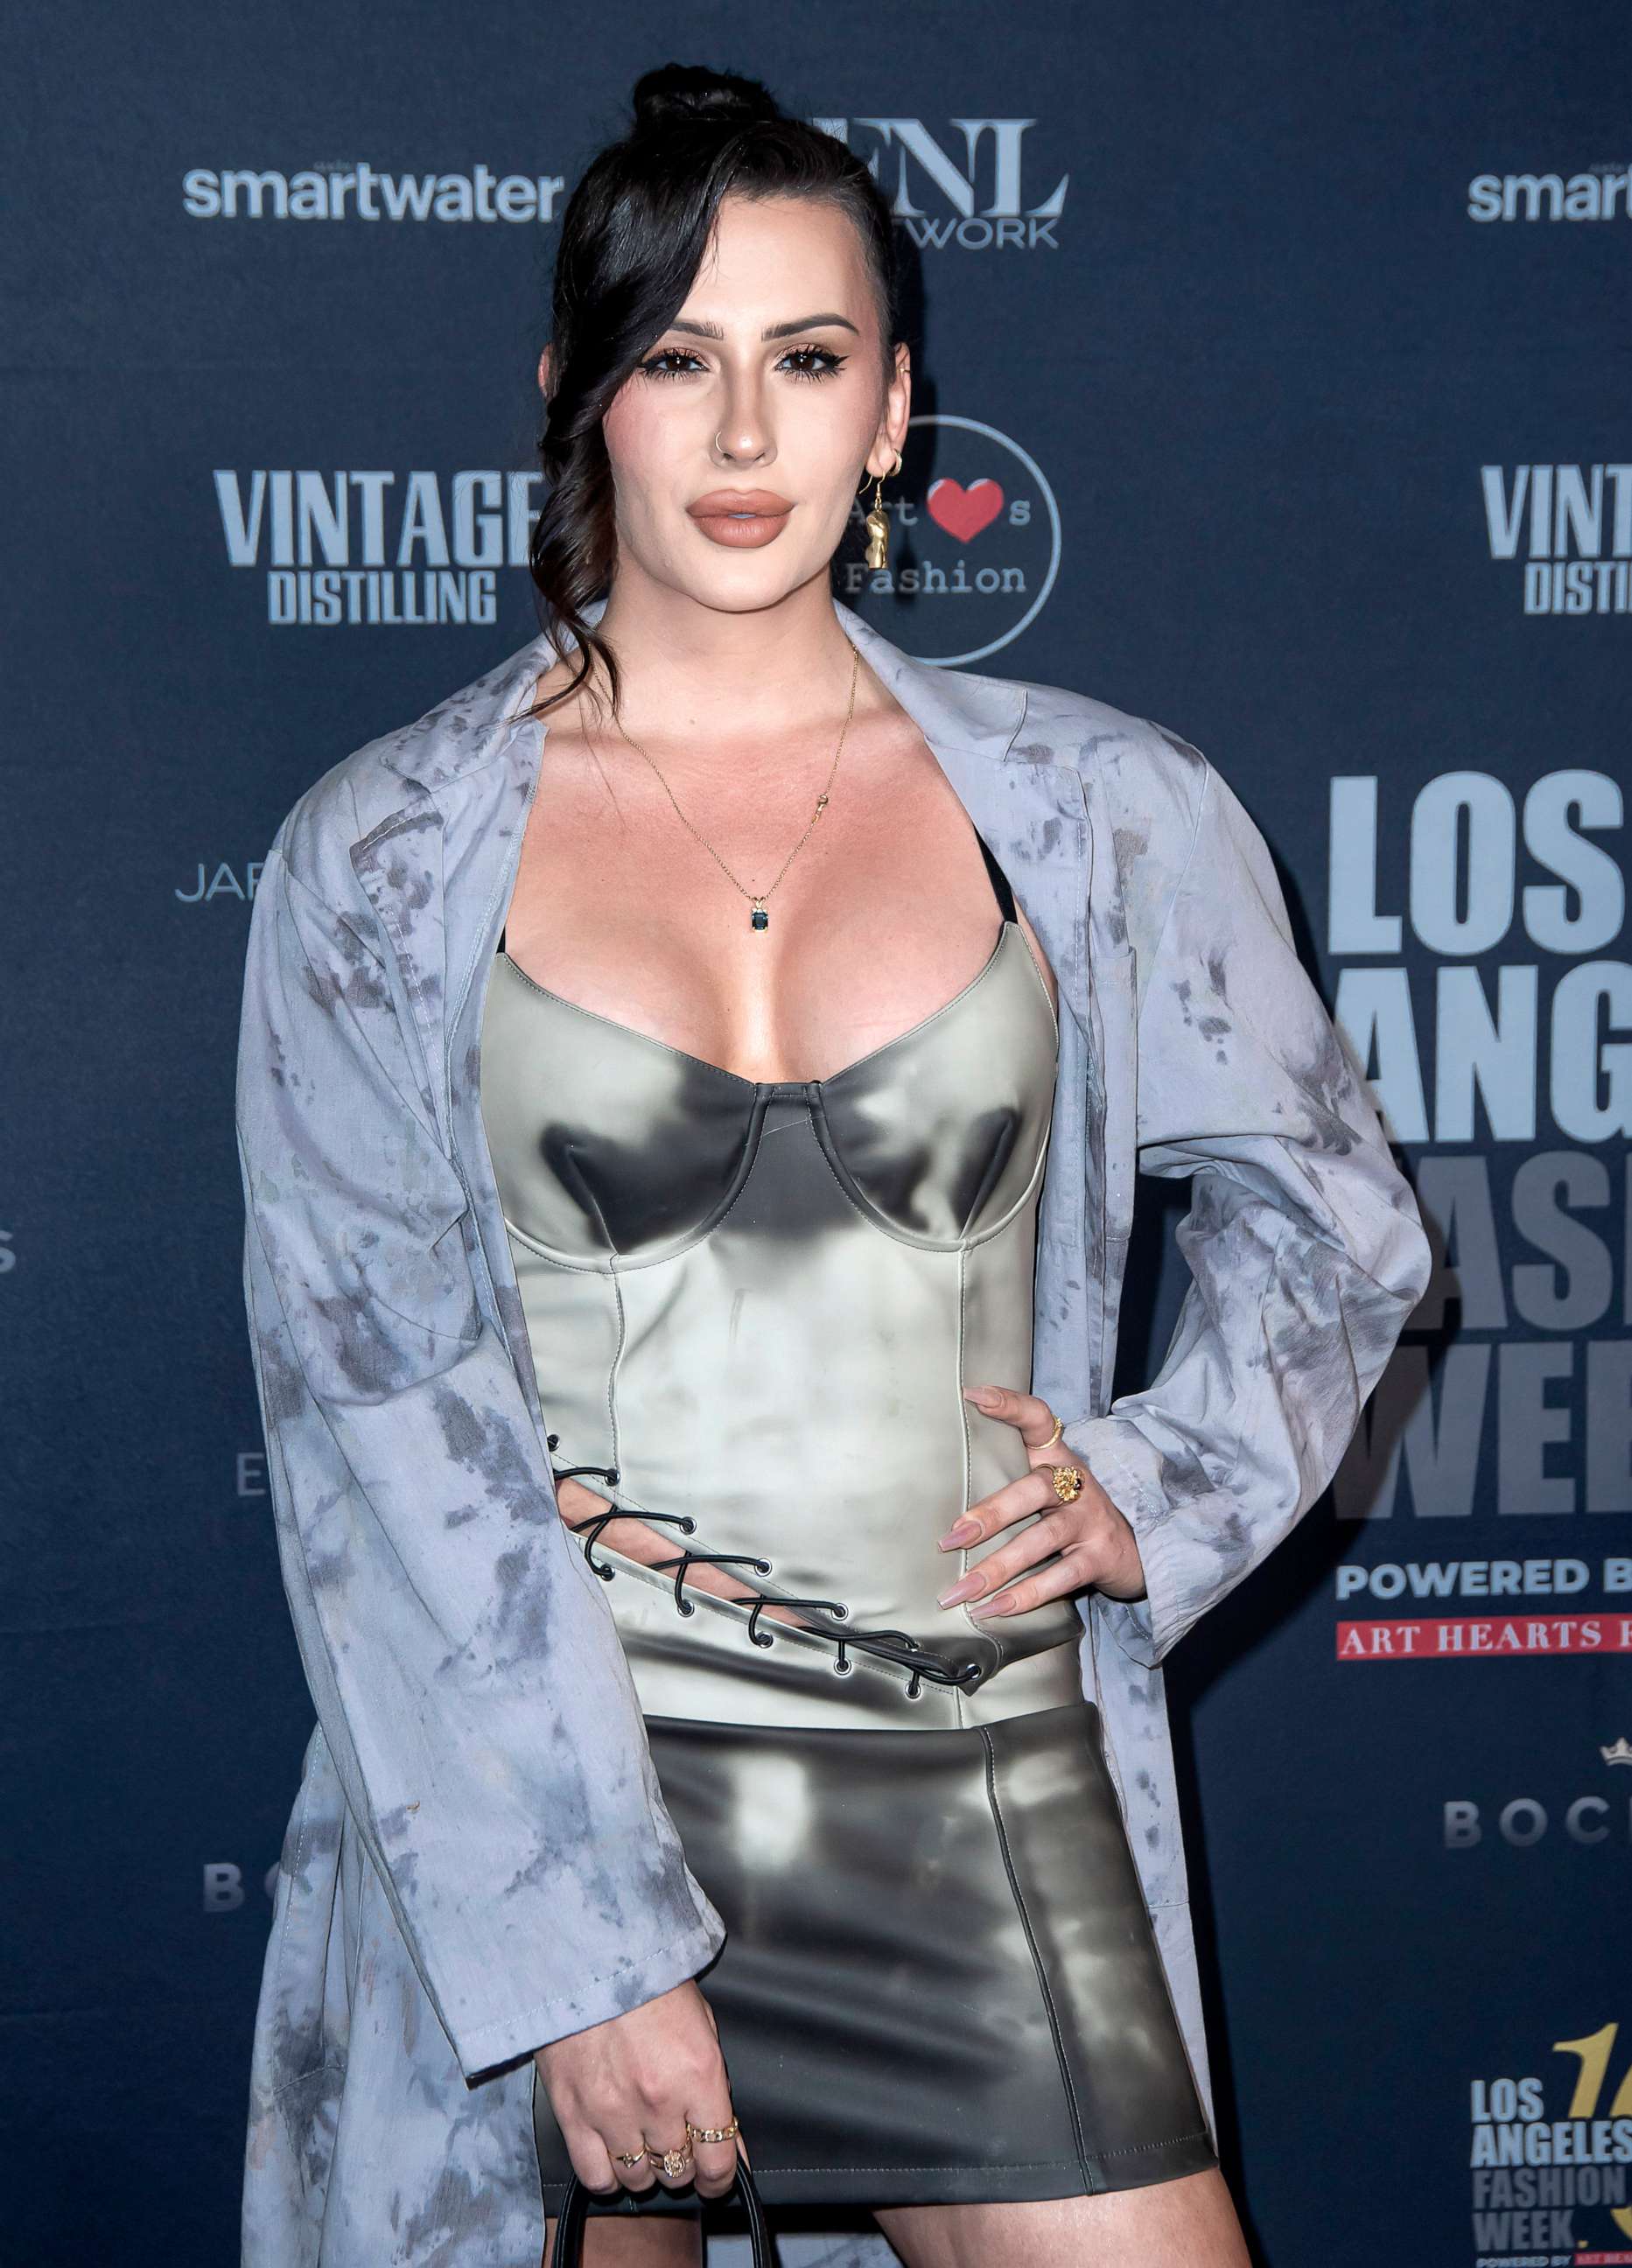 PHOTO: Rose Montoya arrives on the red carpet for Los Angeles Fashion Week Powered by Art Hearts Fashion at The Majestic Downtown, March 18, 2023 in Los Angeles.